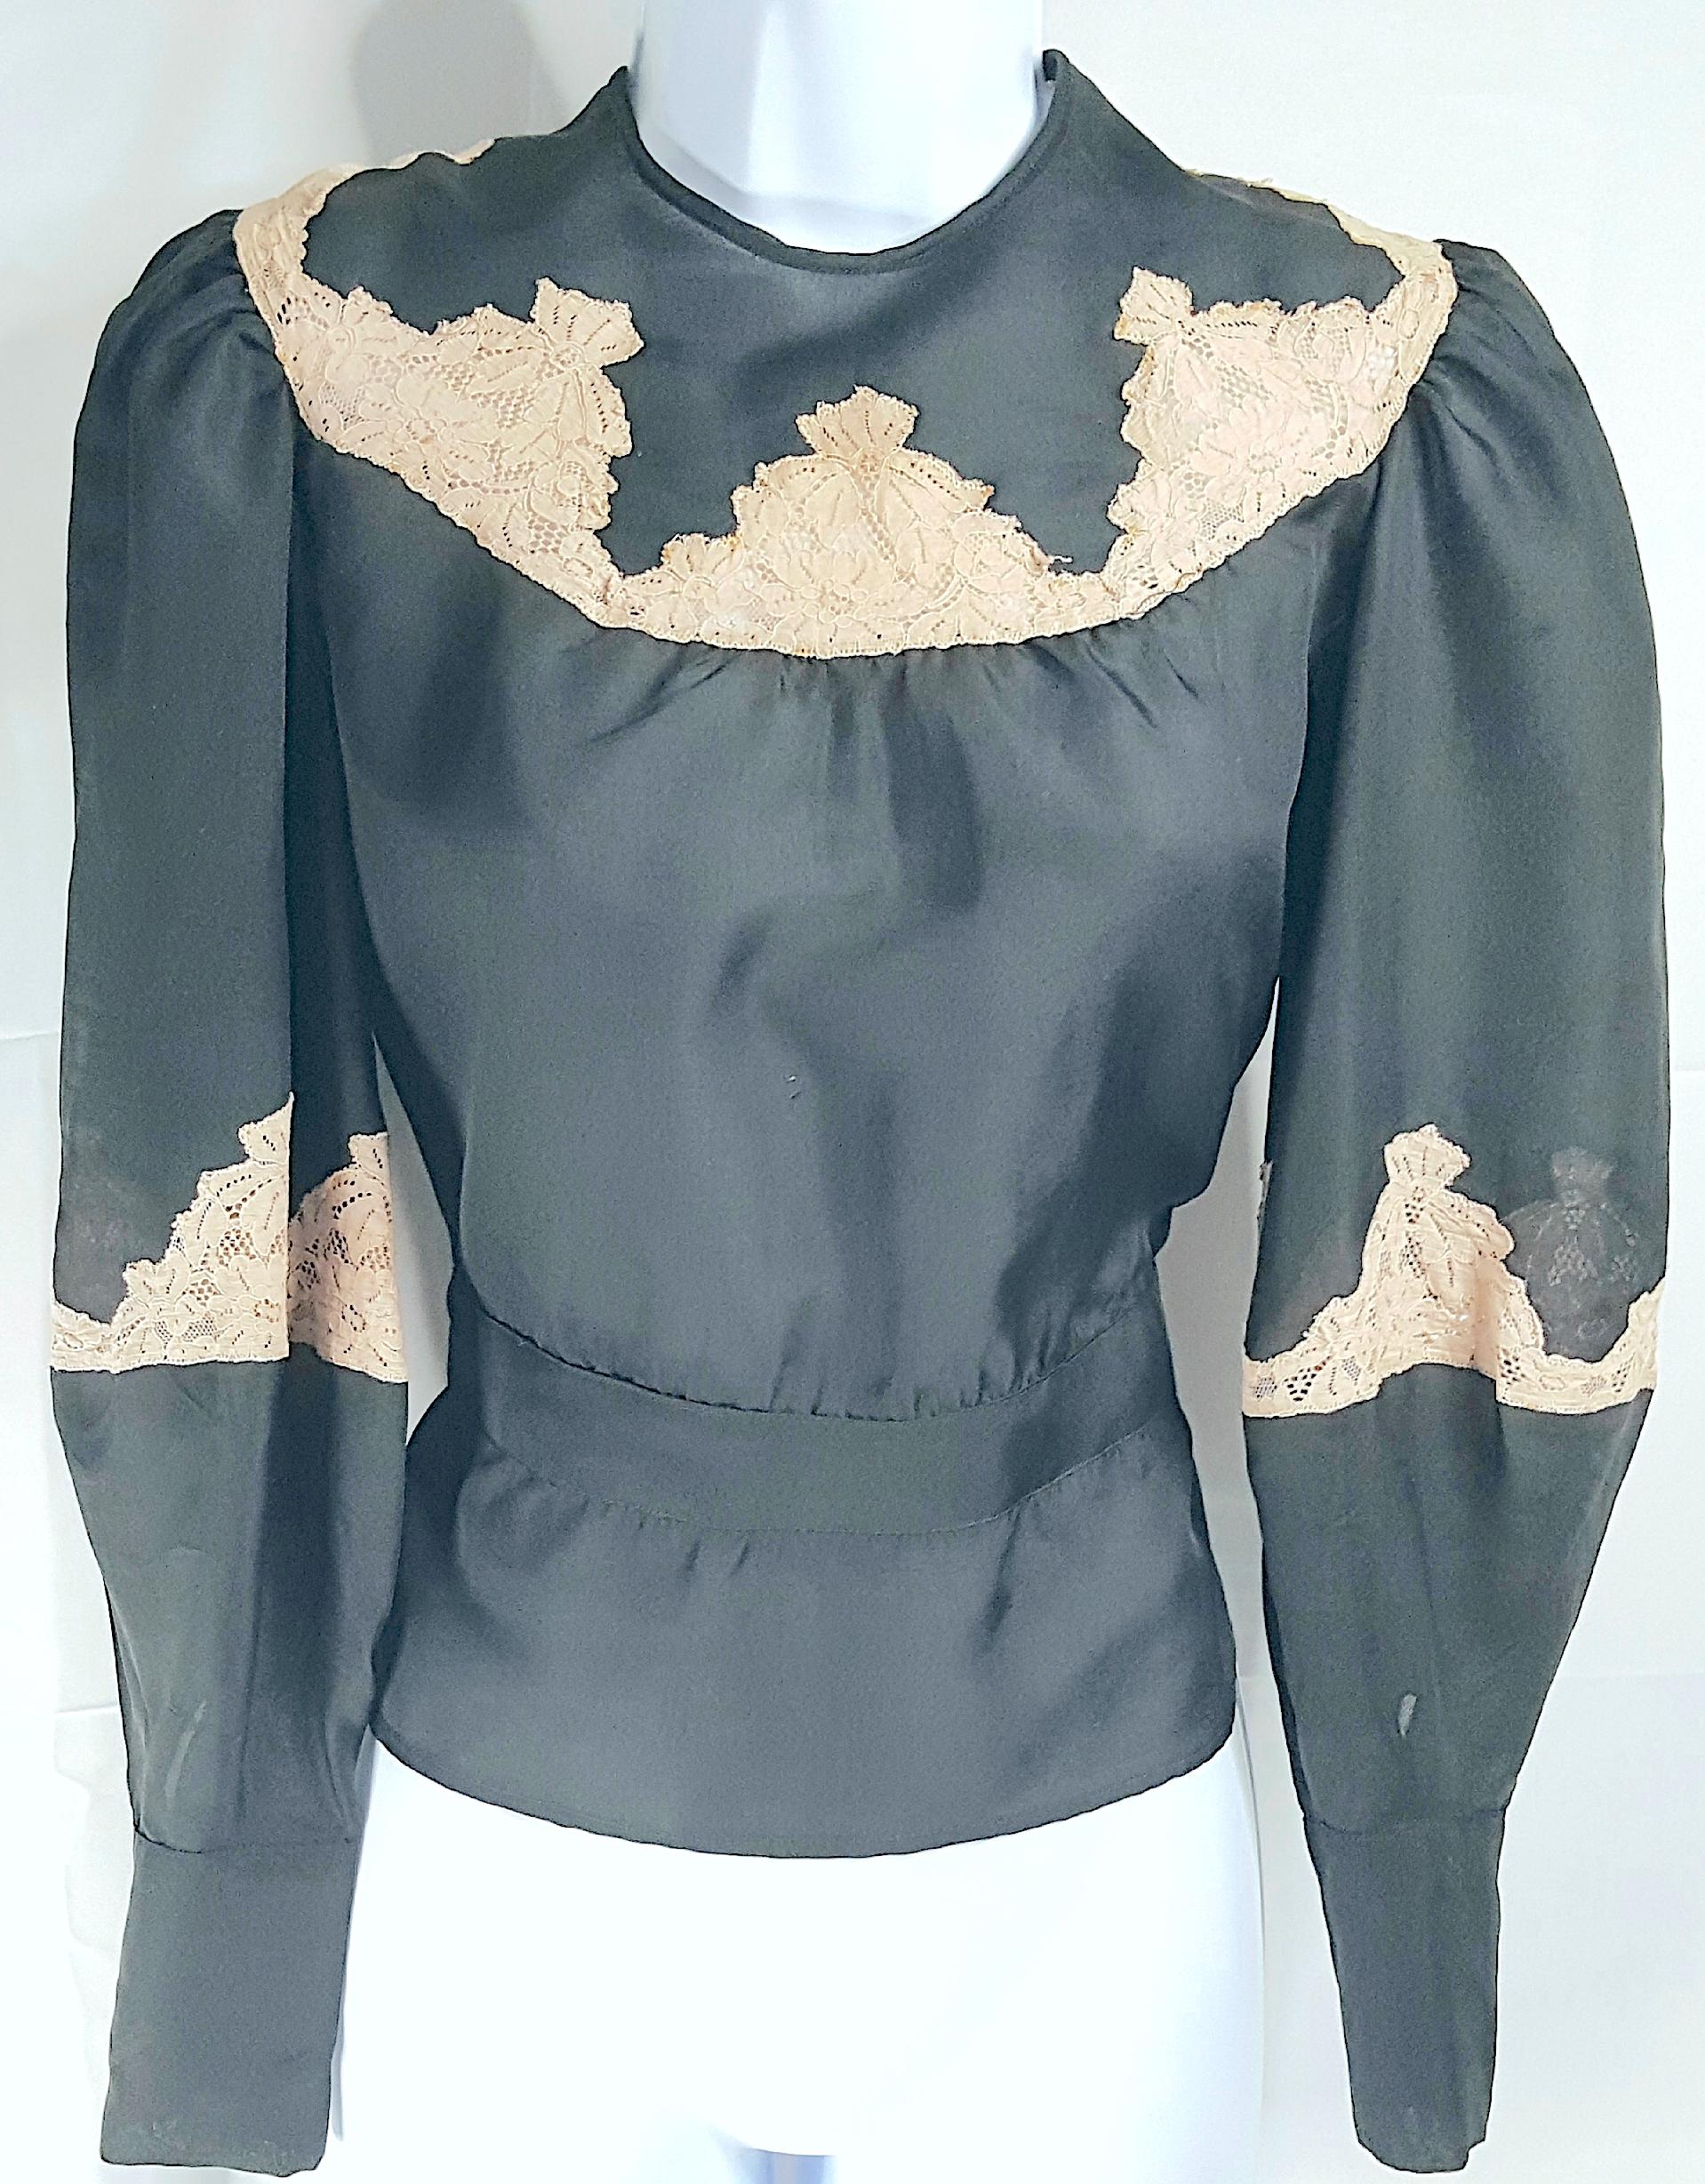 This antique Italian couture semi-transparent black silk-organza long-balloon-sleeved peplum blouse from the Victorian Edwardian period features decorative cut-work with topstitched lettuce-edged ecru lace inserts, which ventilate the arms and